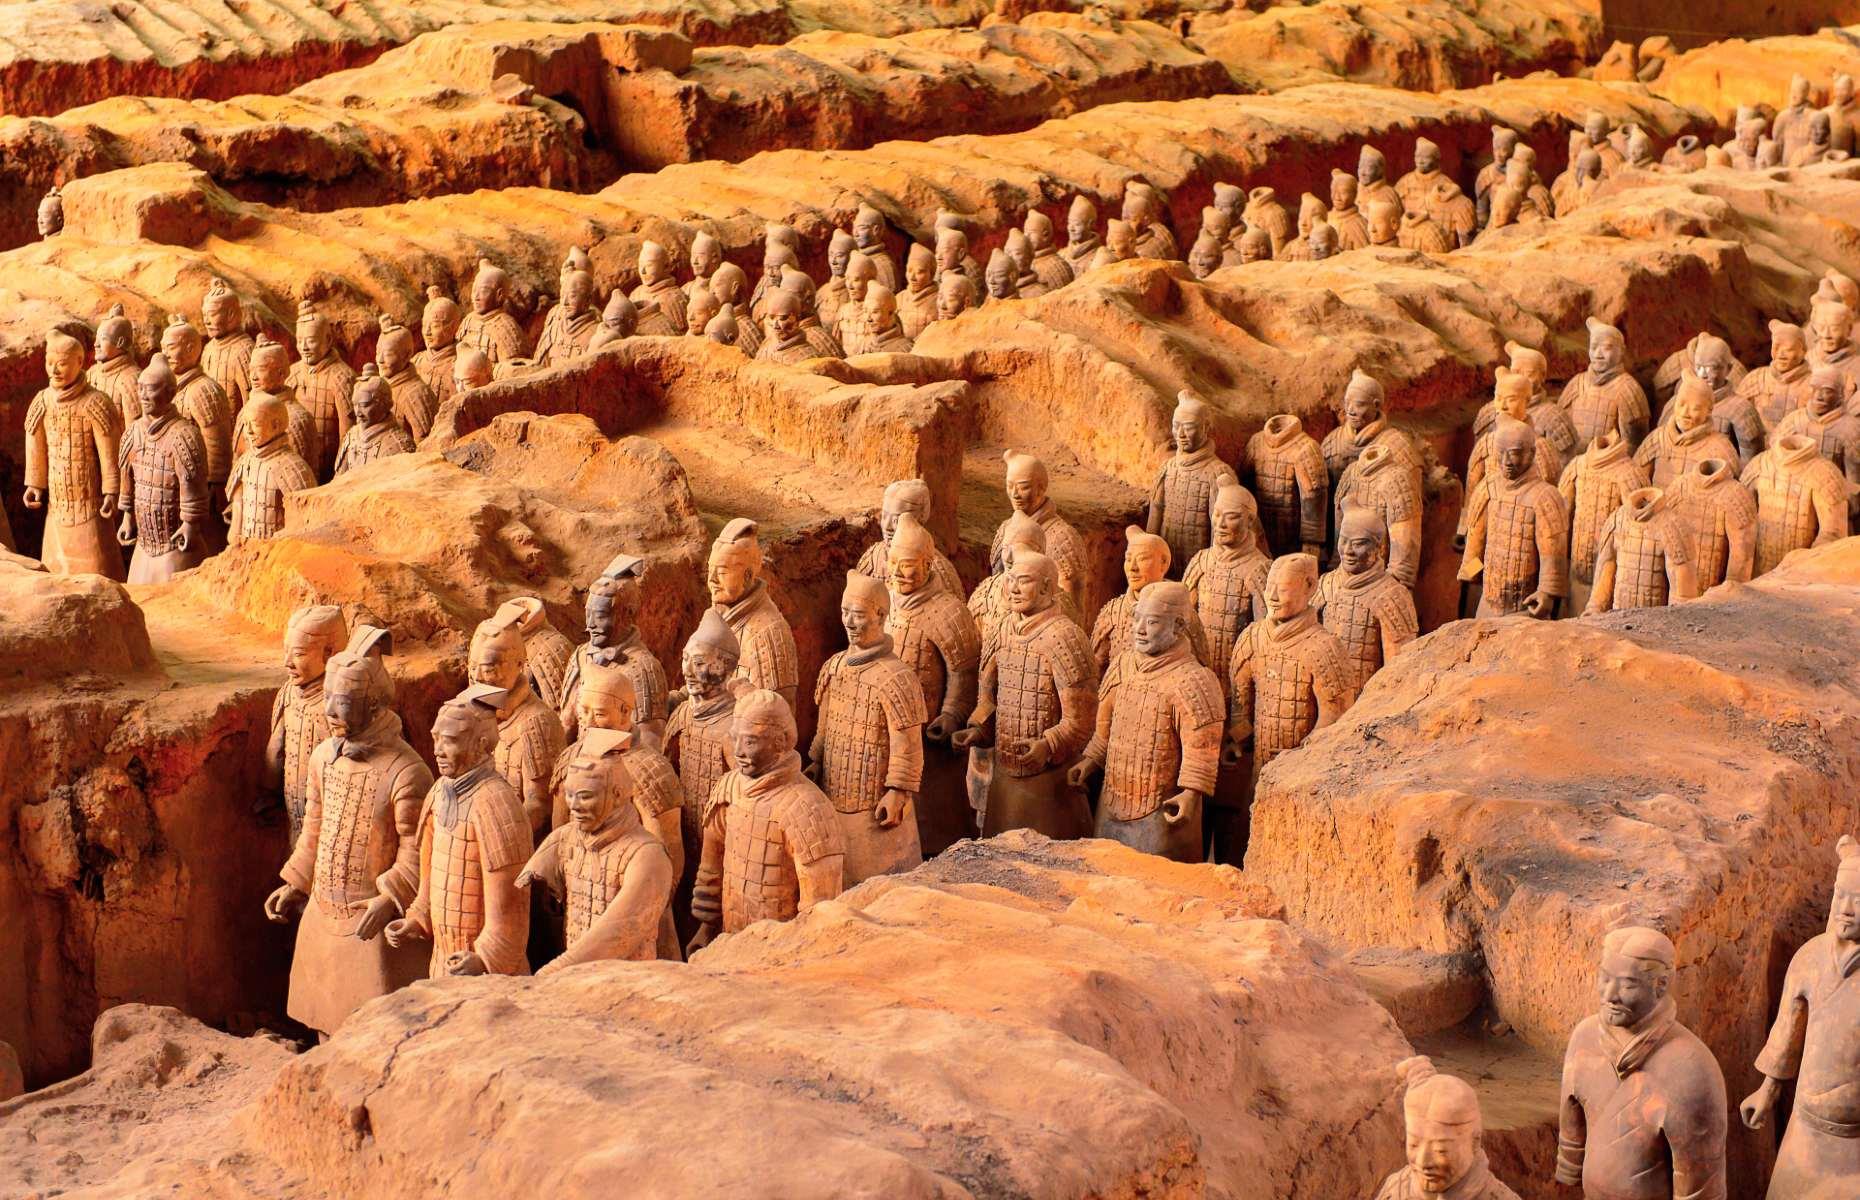 <p>Dating back some 2,200 years, the collection of 8,000 life-size terracotta figures in Xi’an is among China’s most impressive – and intriguing – ancient wonders. Built to represent the troops of the country’s first emperor, Qin Shi Huang, the soldiers were only discovered in 1974, lying in the extensive subterranean vaults beneath the tomb of this enigmatic ruler. Each figure is slightly different and it’s even thought that their facial features were made to represent the workman who created them. It’s difficult to avoid the crowds at this popular site, but it's best to head to the museum when it opens at 8.30am and take a guided tour of the statue-filled pits. </p>